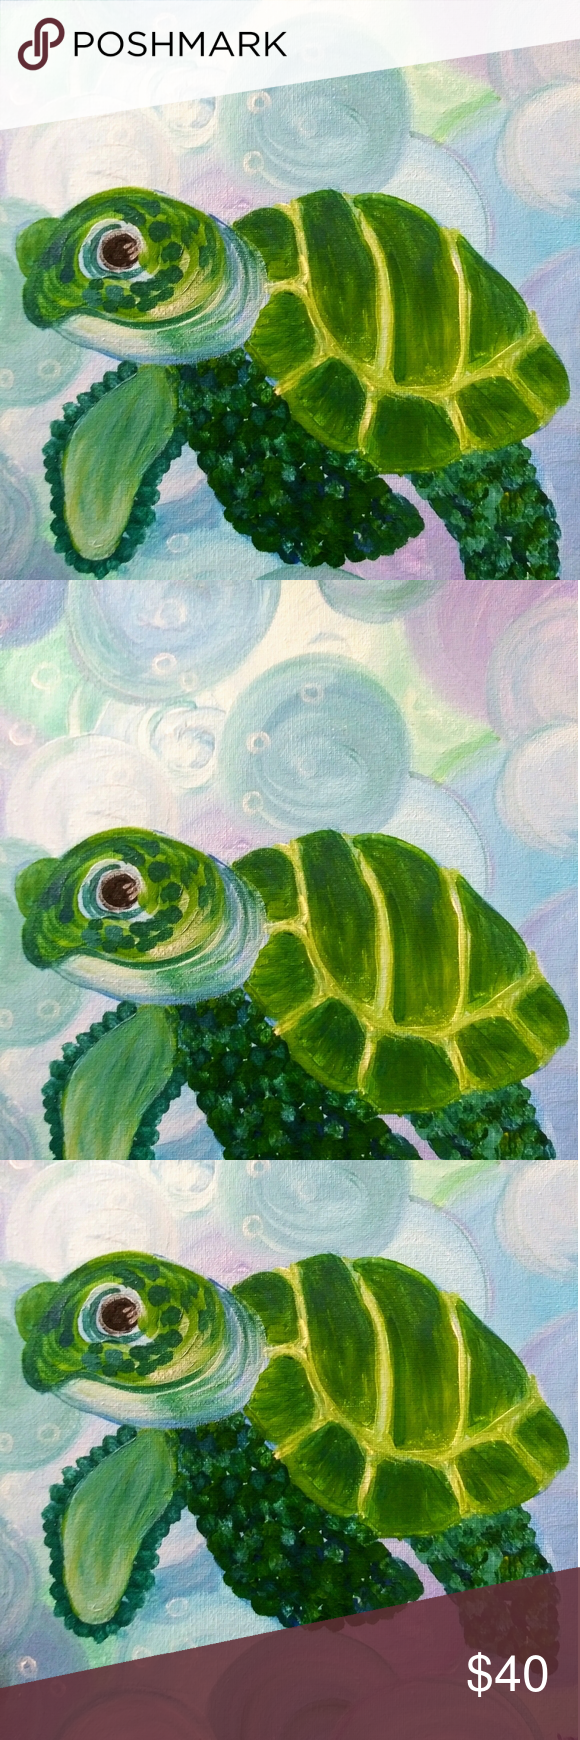 Sea Turtle Original Painting Hand painted in acrylics by yours truly.  All sides…